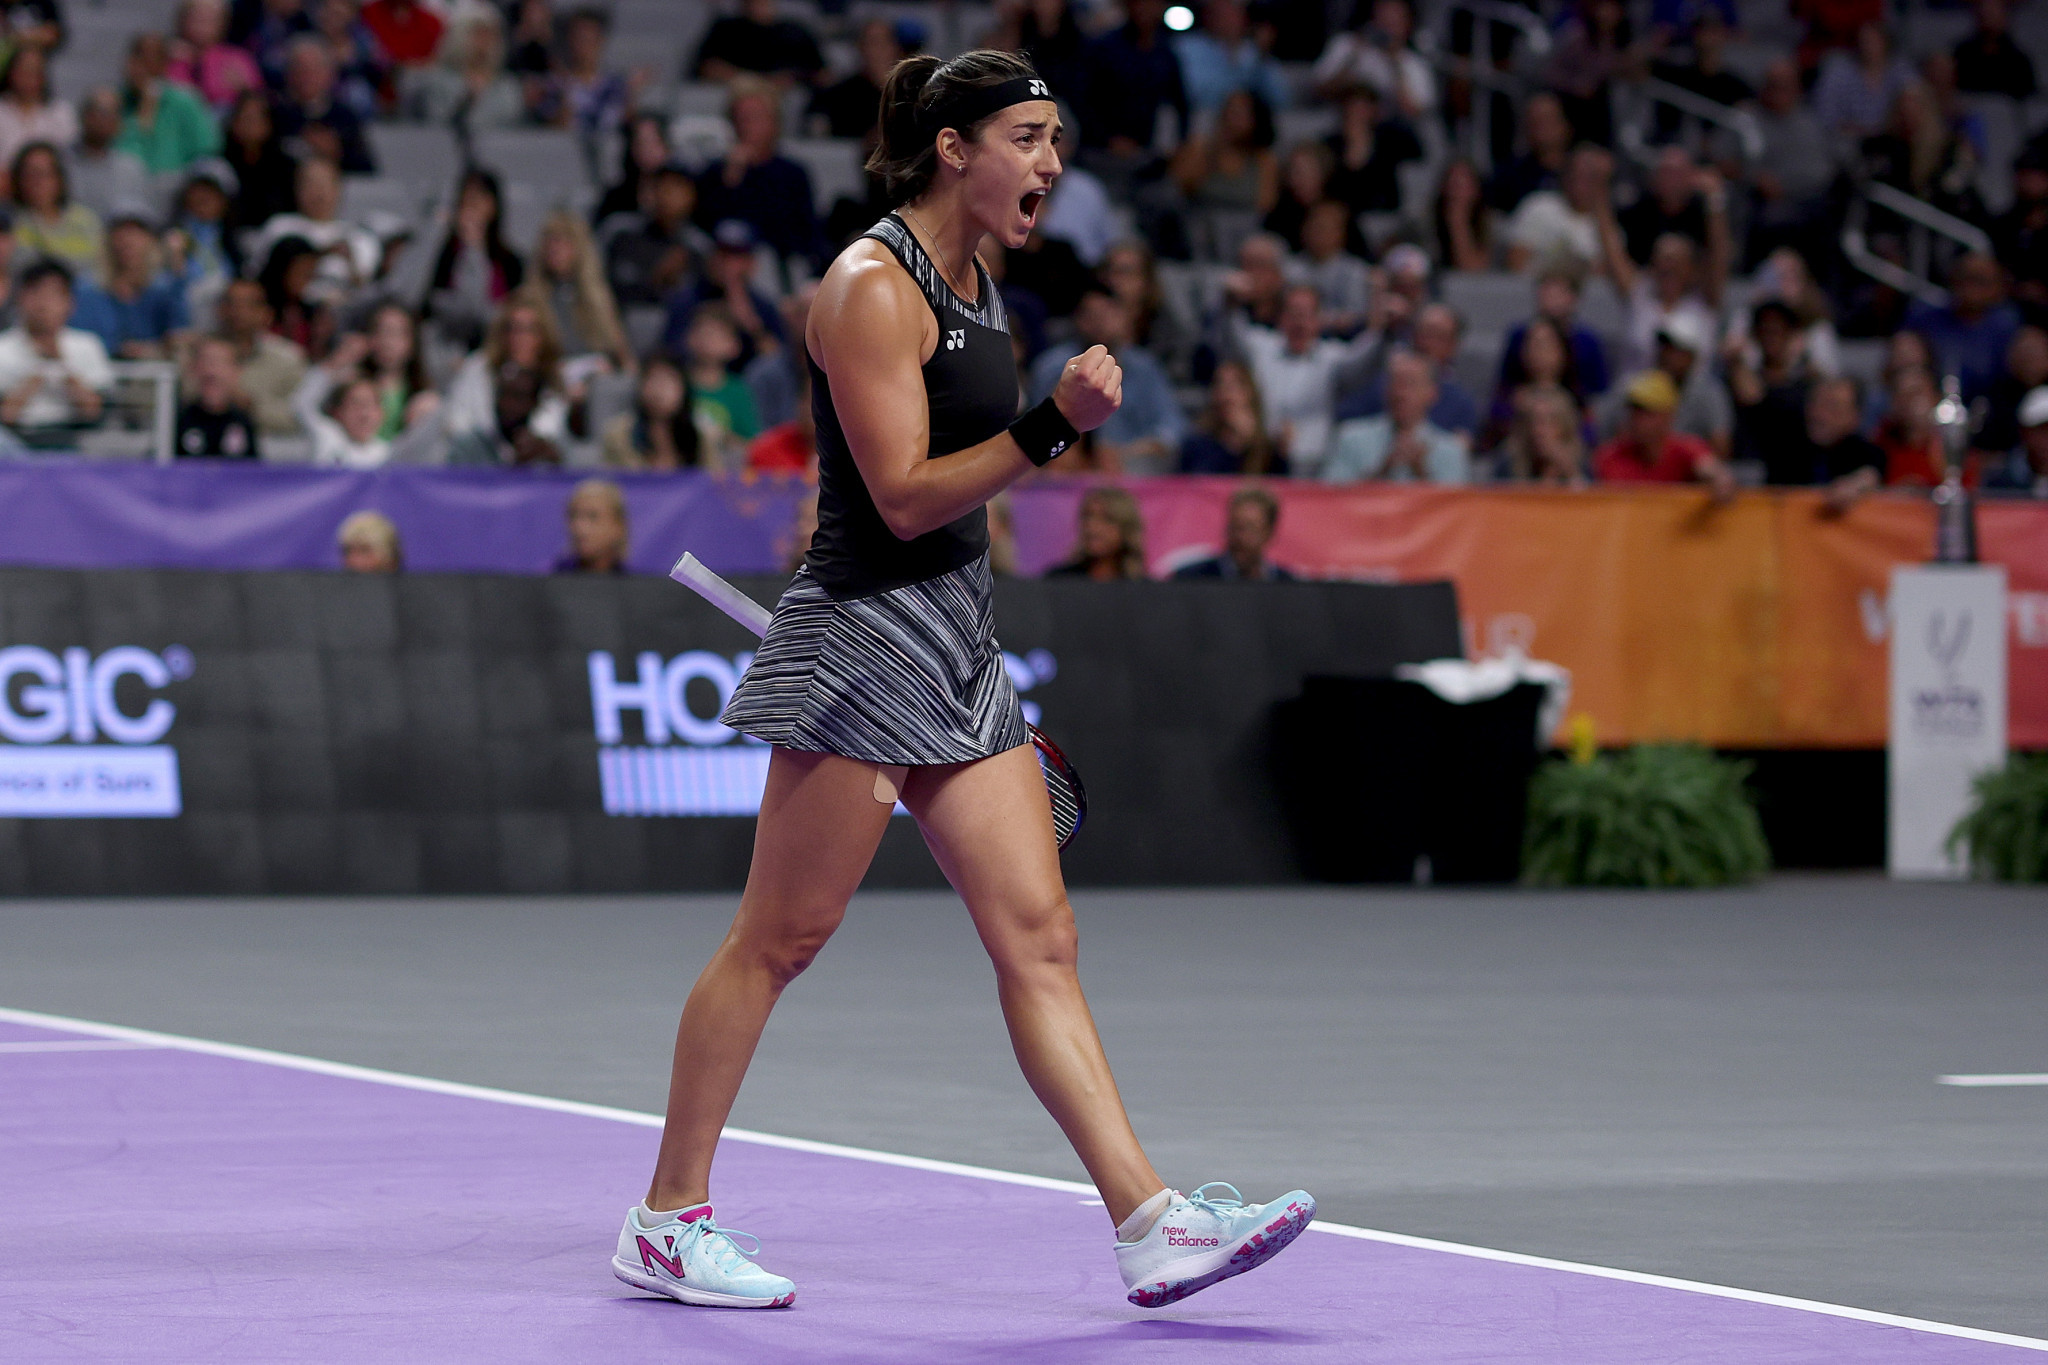 Great form takes Garcia to WTA Finals title win in Fort Worth